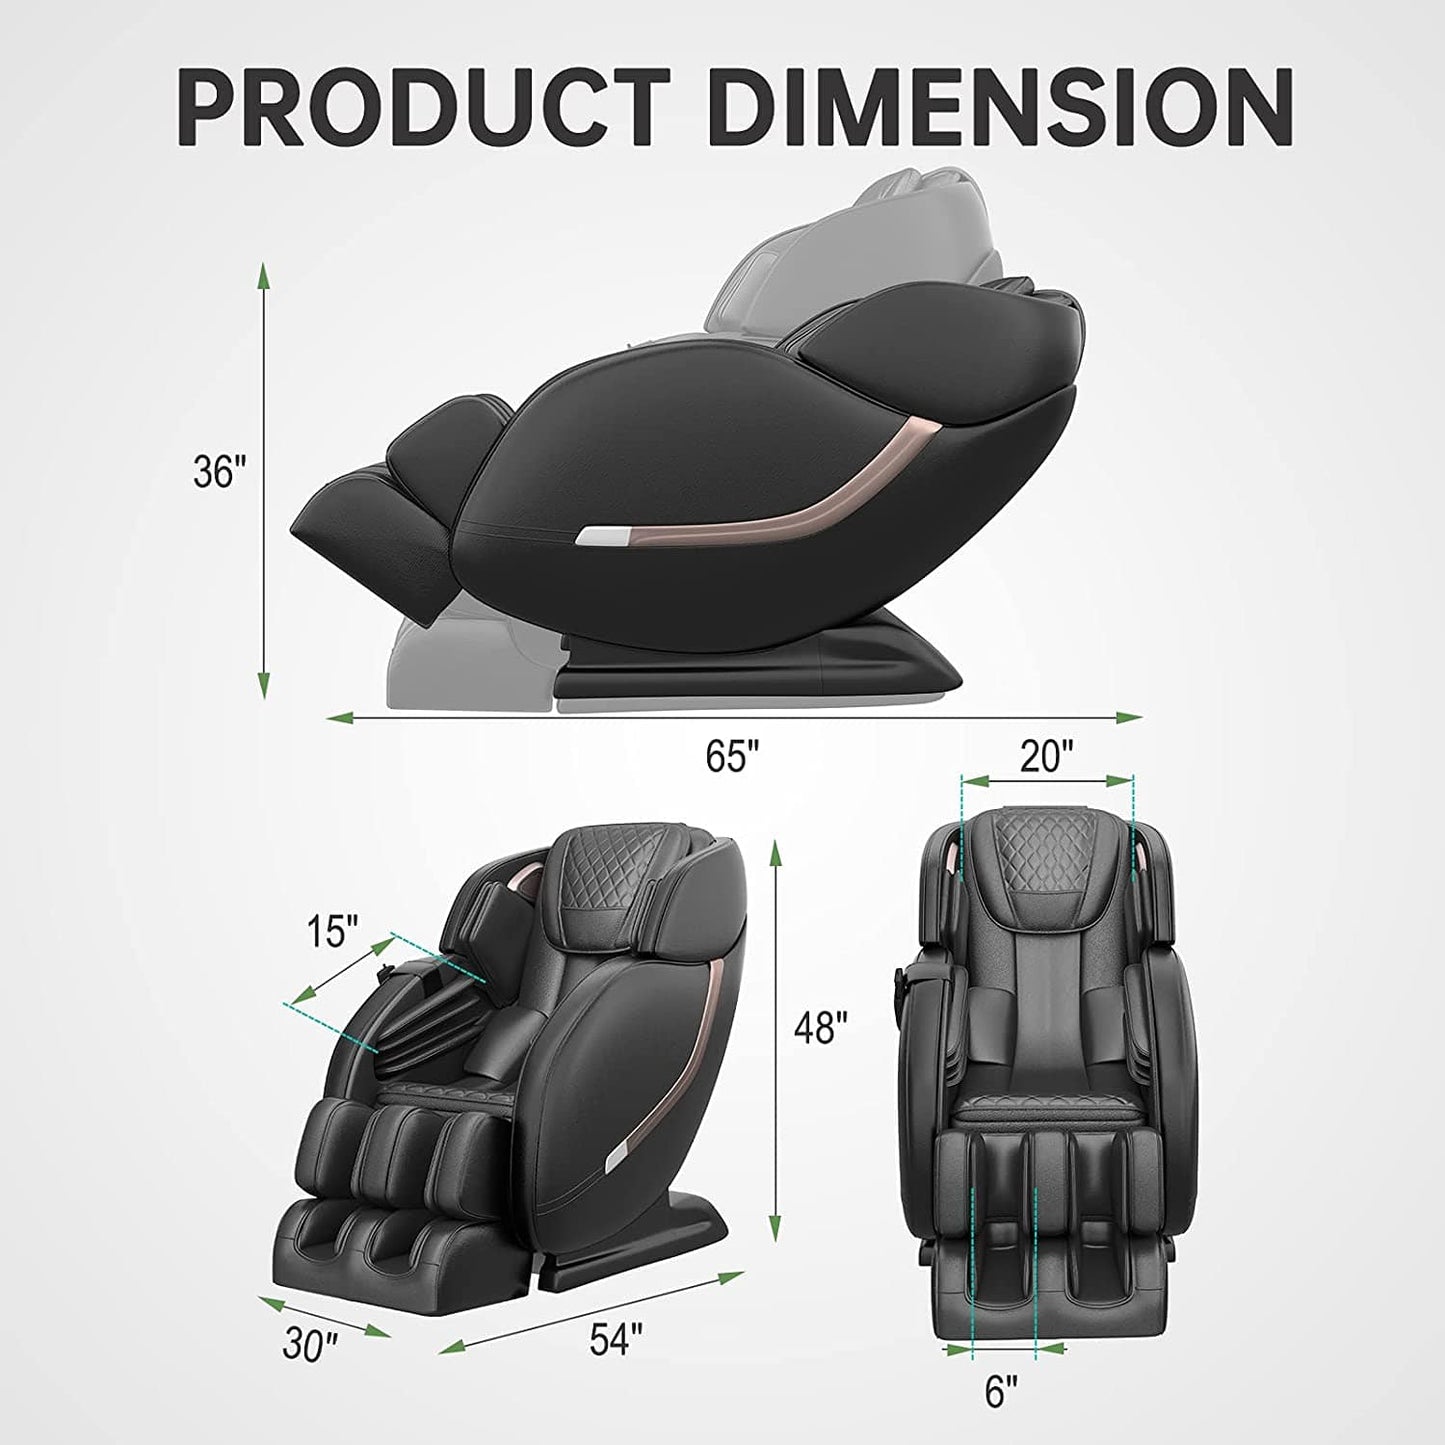 Real Relax Massage Chair Real Relax® PS3000 Massage Chair black